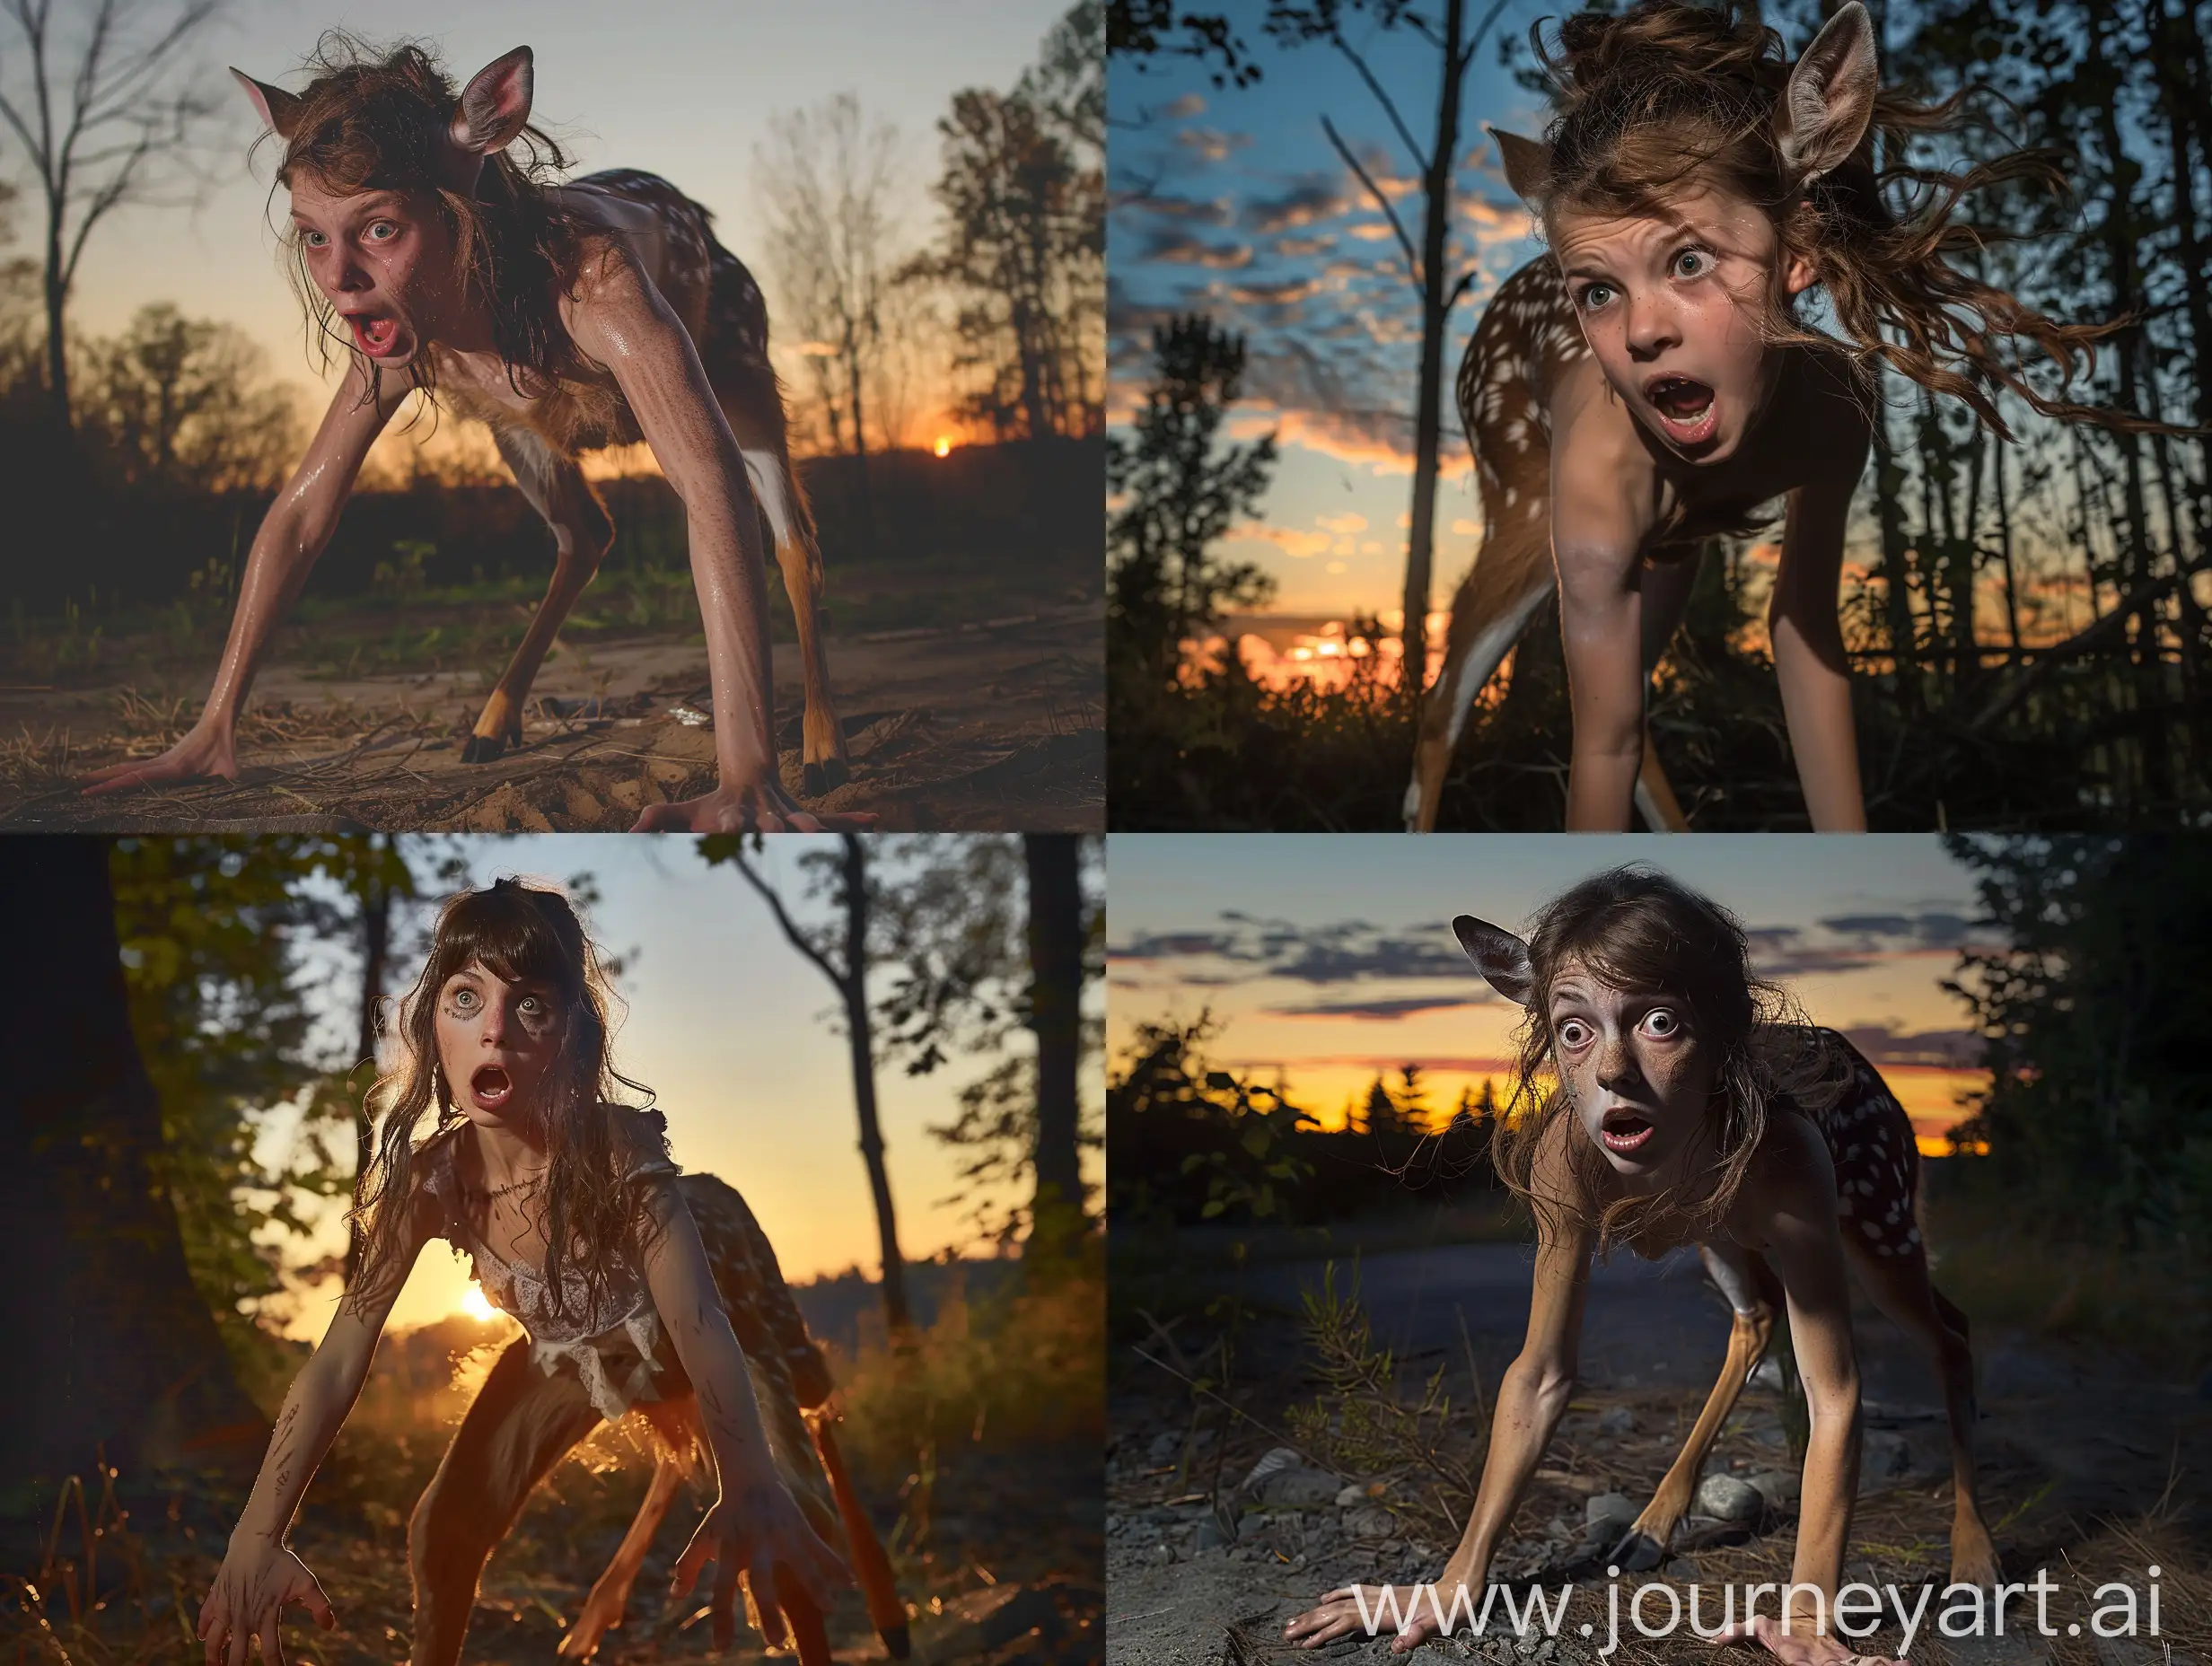 A young woman with loose brown hair, who has been transformed into a deer. The photo is taken while the transformation is almost completed. She is standing on all fours in a forest at sunset. She has a desperate expression, screaming for help. Realistic photograph, full body picture.